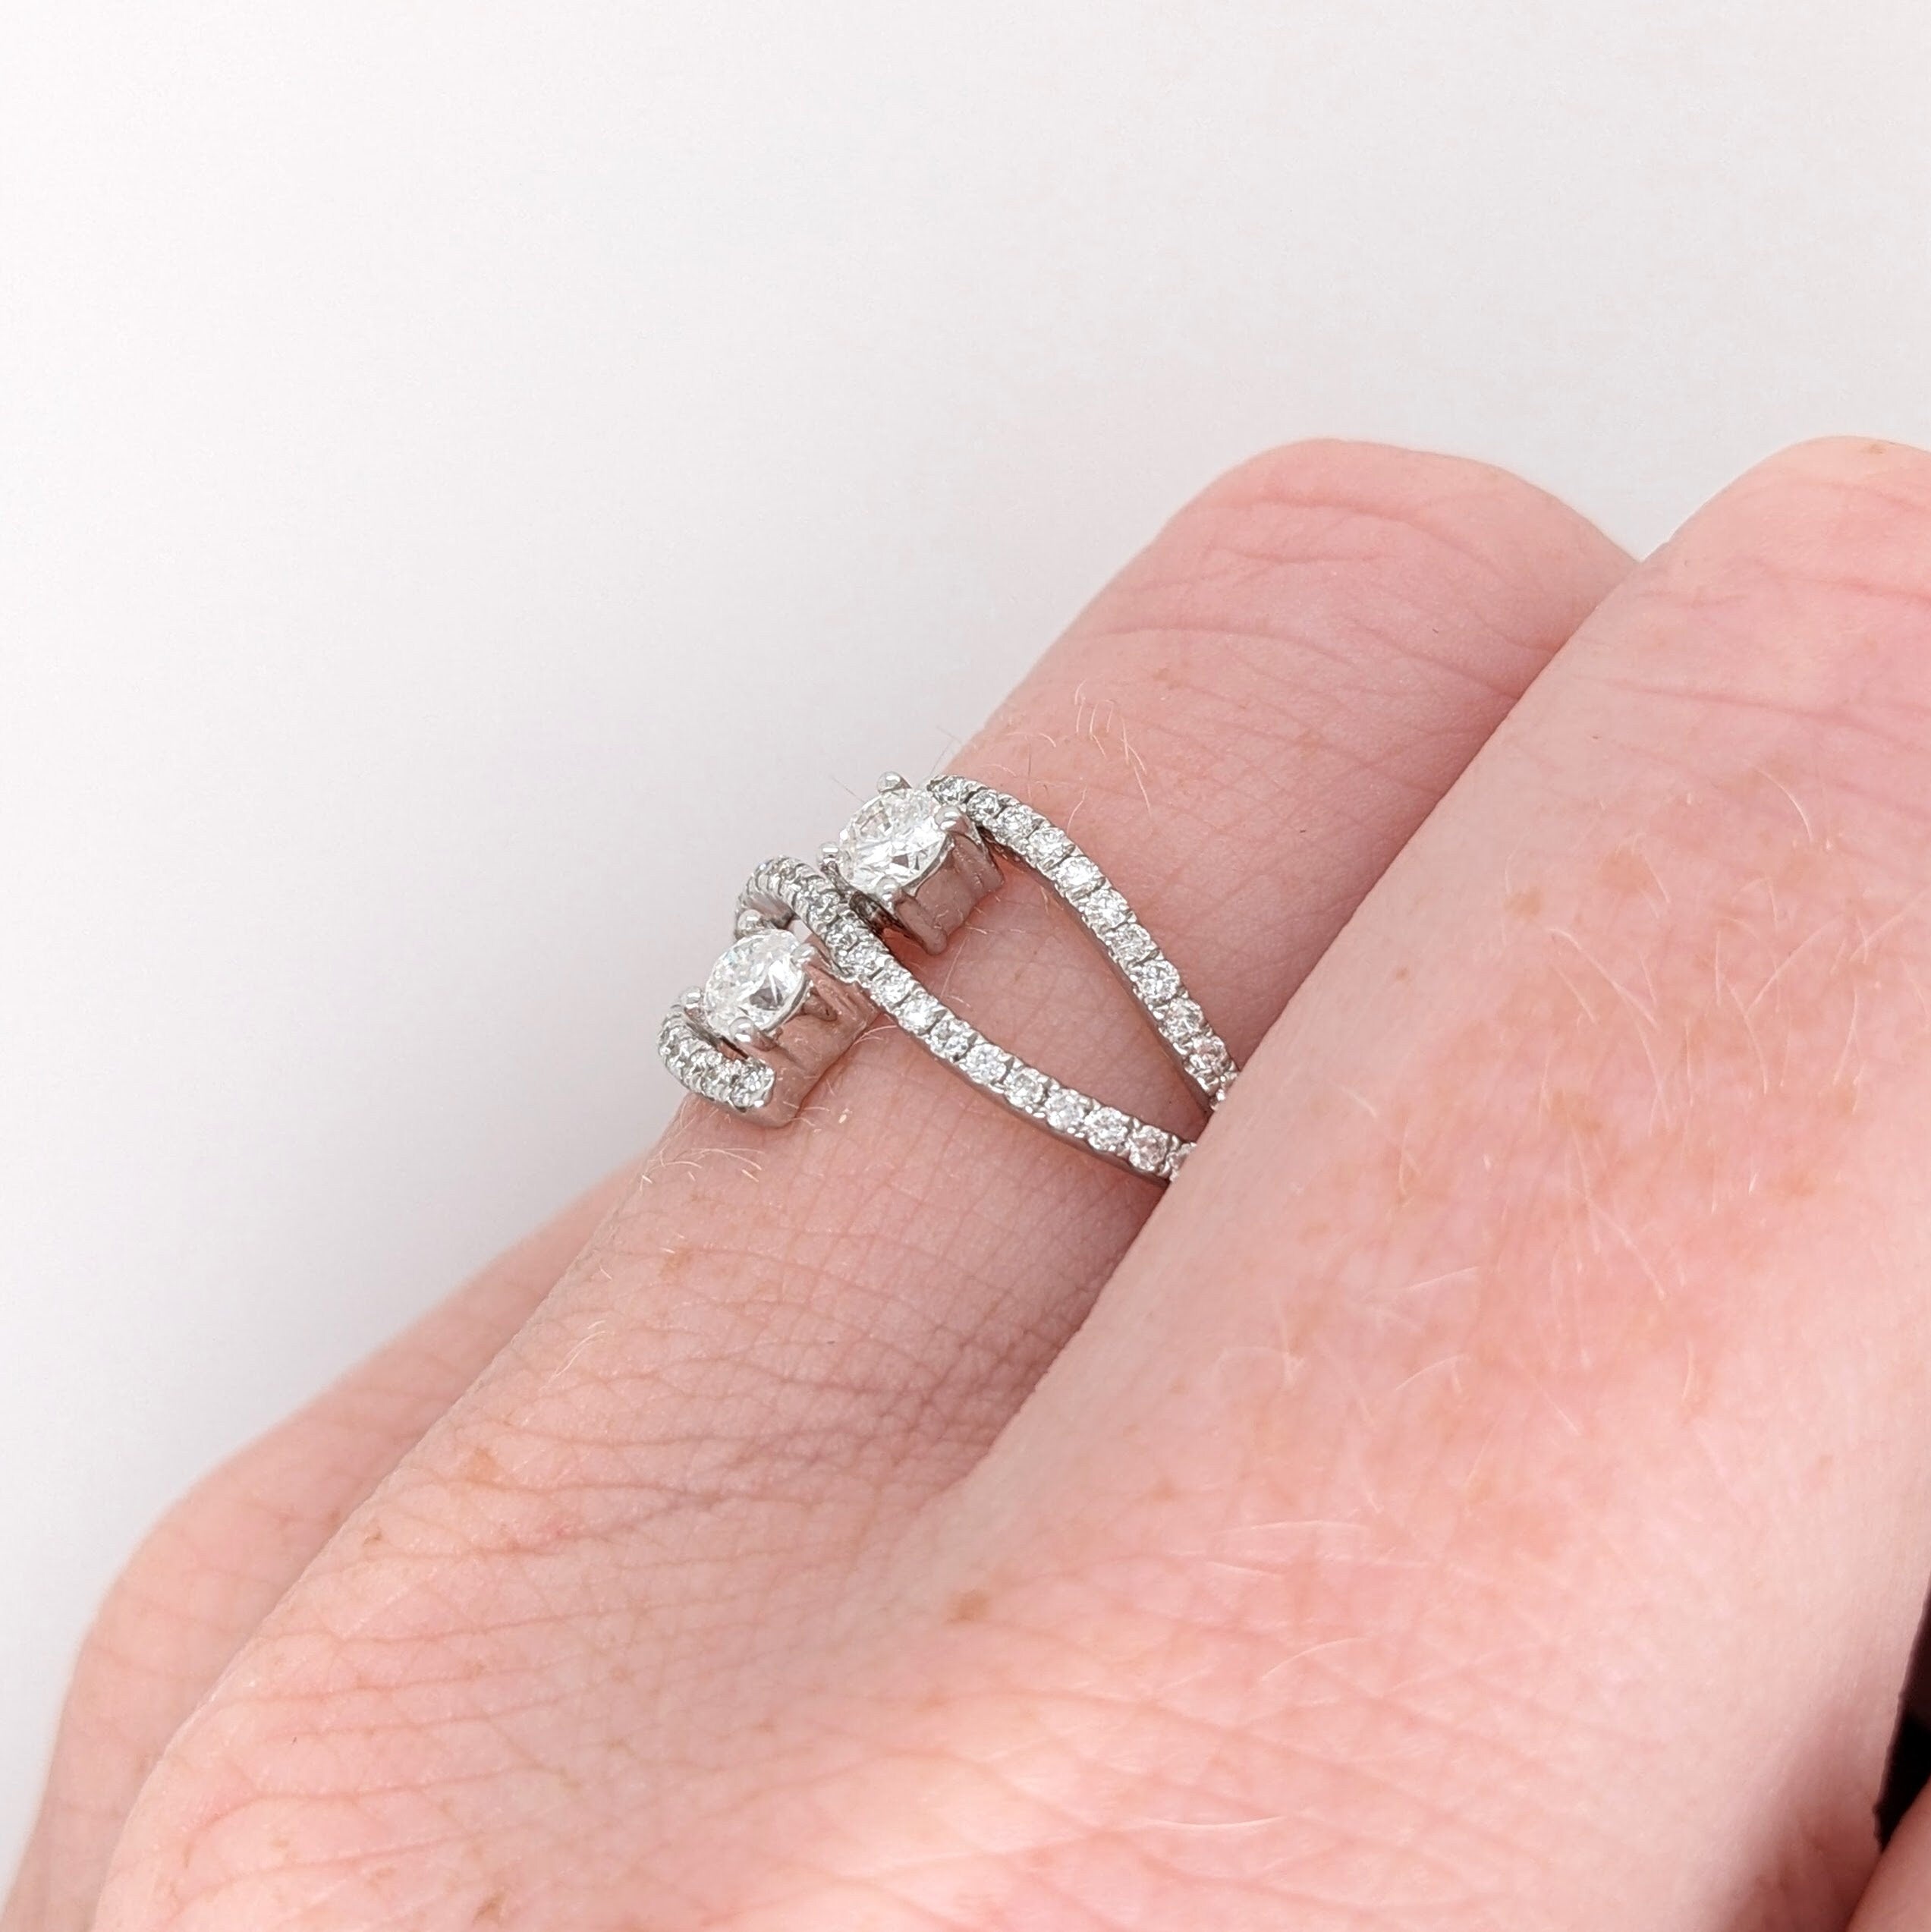 Multi-Stone Rings-Unique Diamond Ring with Natural Diamond Accents in 14k Solid White Gold | Round 3mm | Bypass Ring | April Birthstone | Two Stone Ring - NNJGemstones